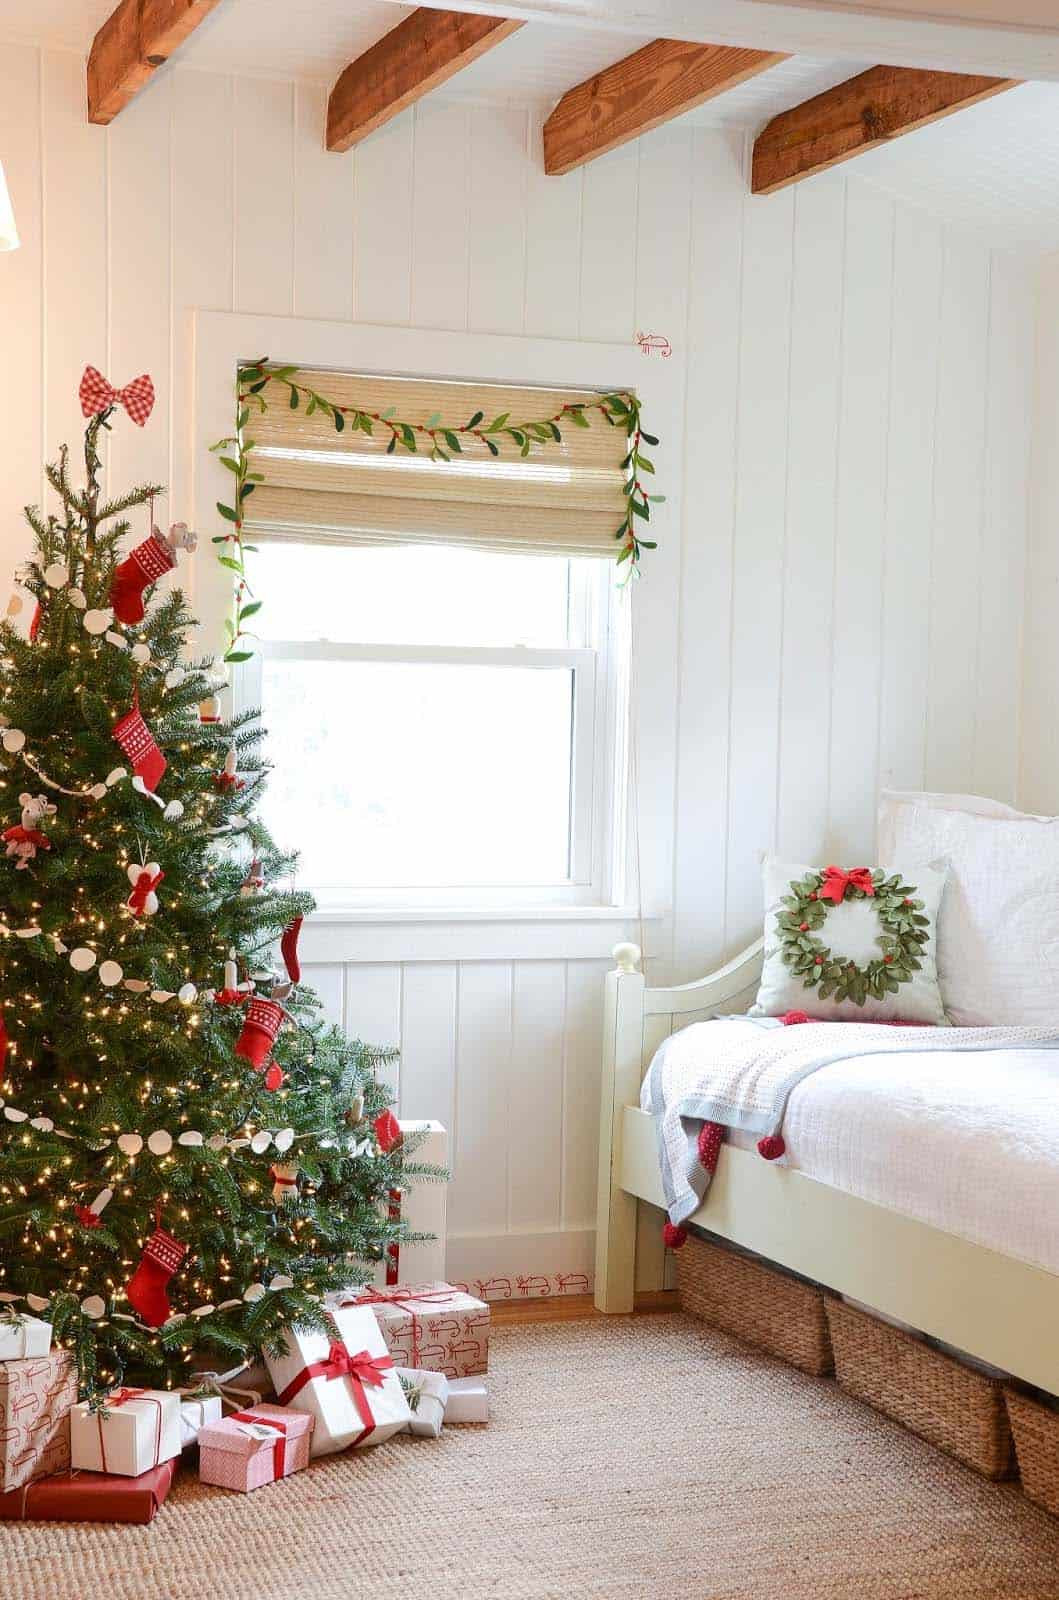 Christmas Decorations Bedroom
 35 Ways to create a Christmas wonderland in your bedroom